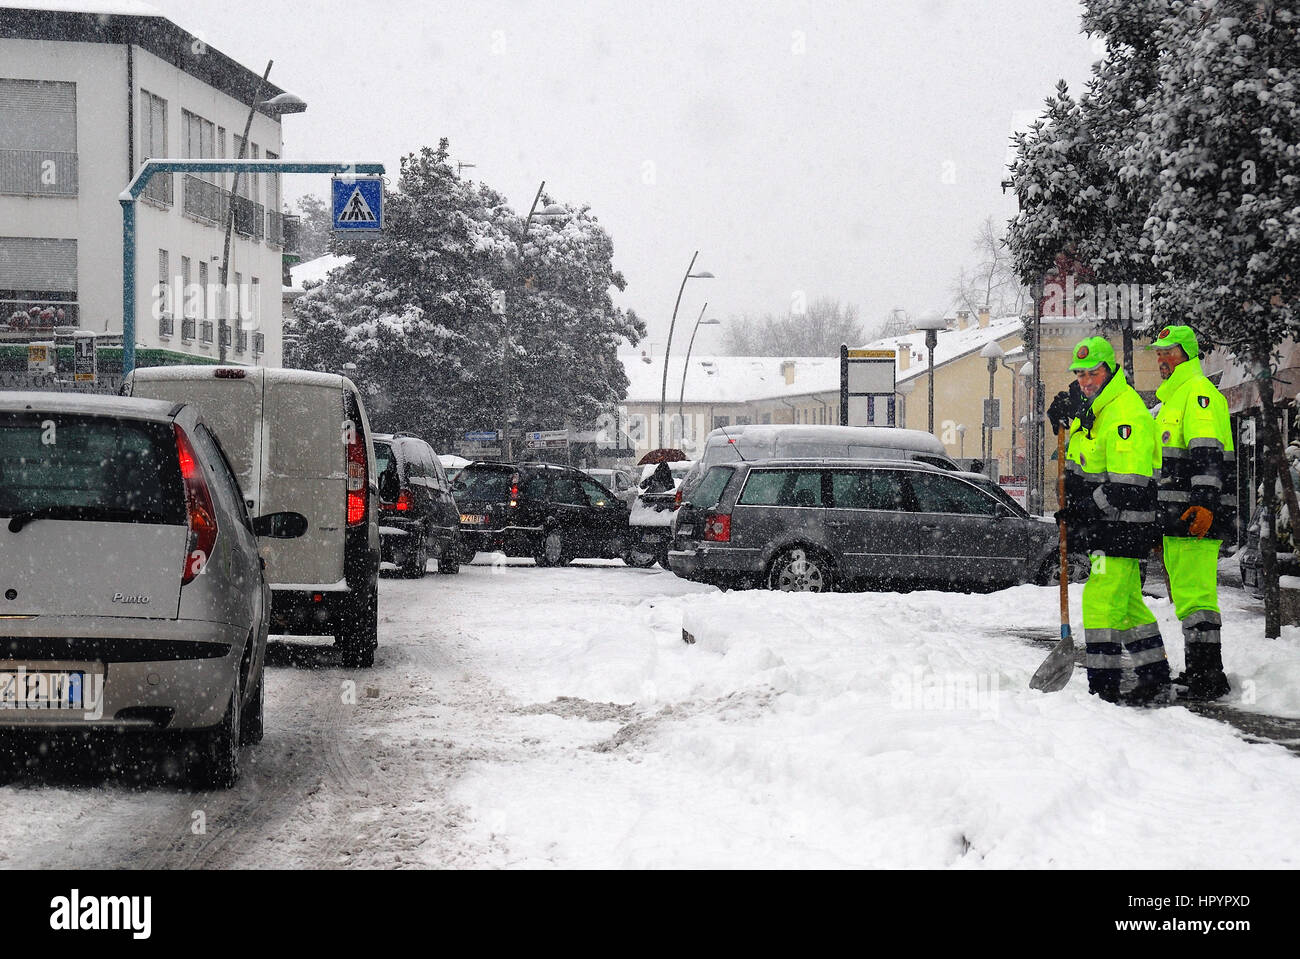 Cadoneghe, Veneto, Italy. A heavy snowfall caused many inconveniences to drivers. Men of Civil Defence clean up the streets after a snowfall. Stock Photo